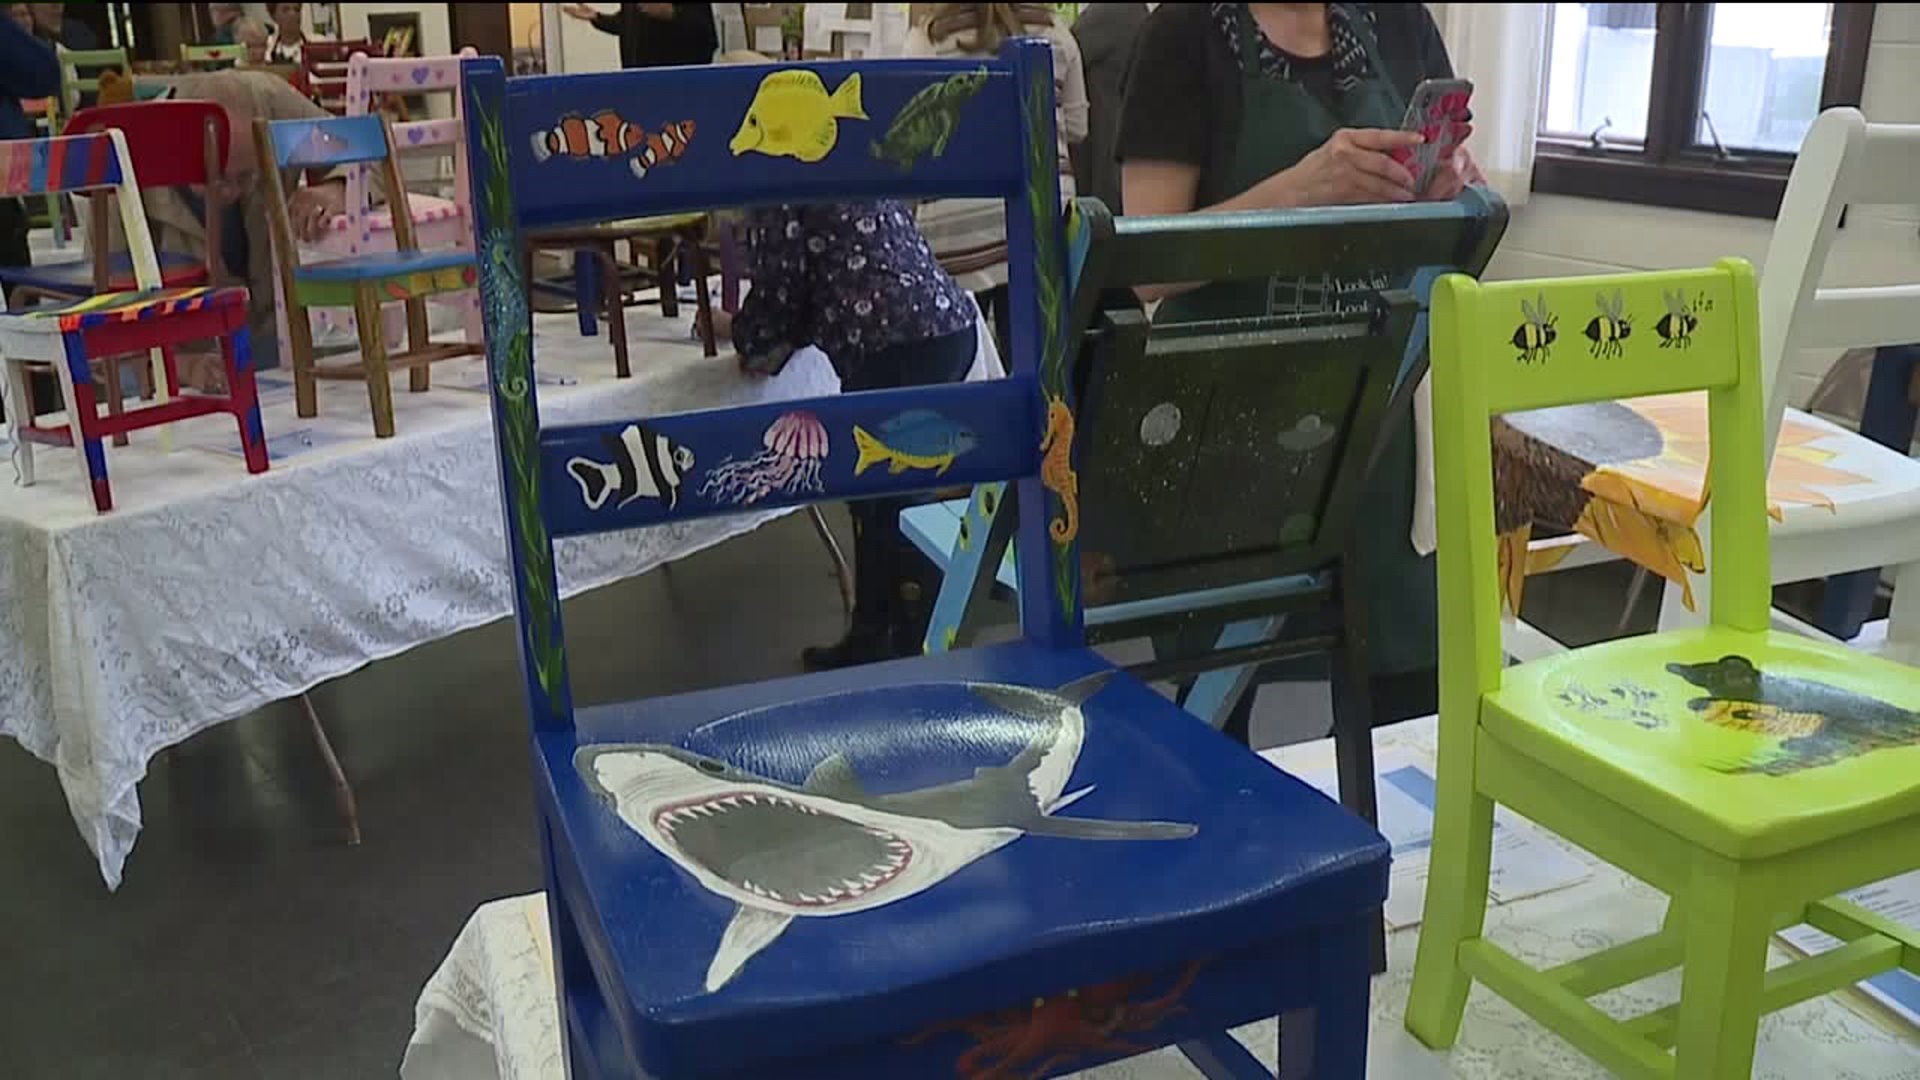 'Chair-ity' Event in Lackawanna County